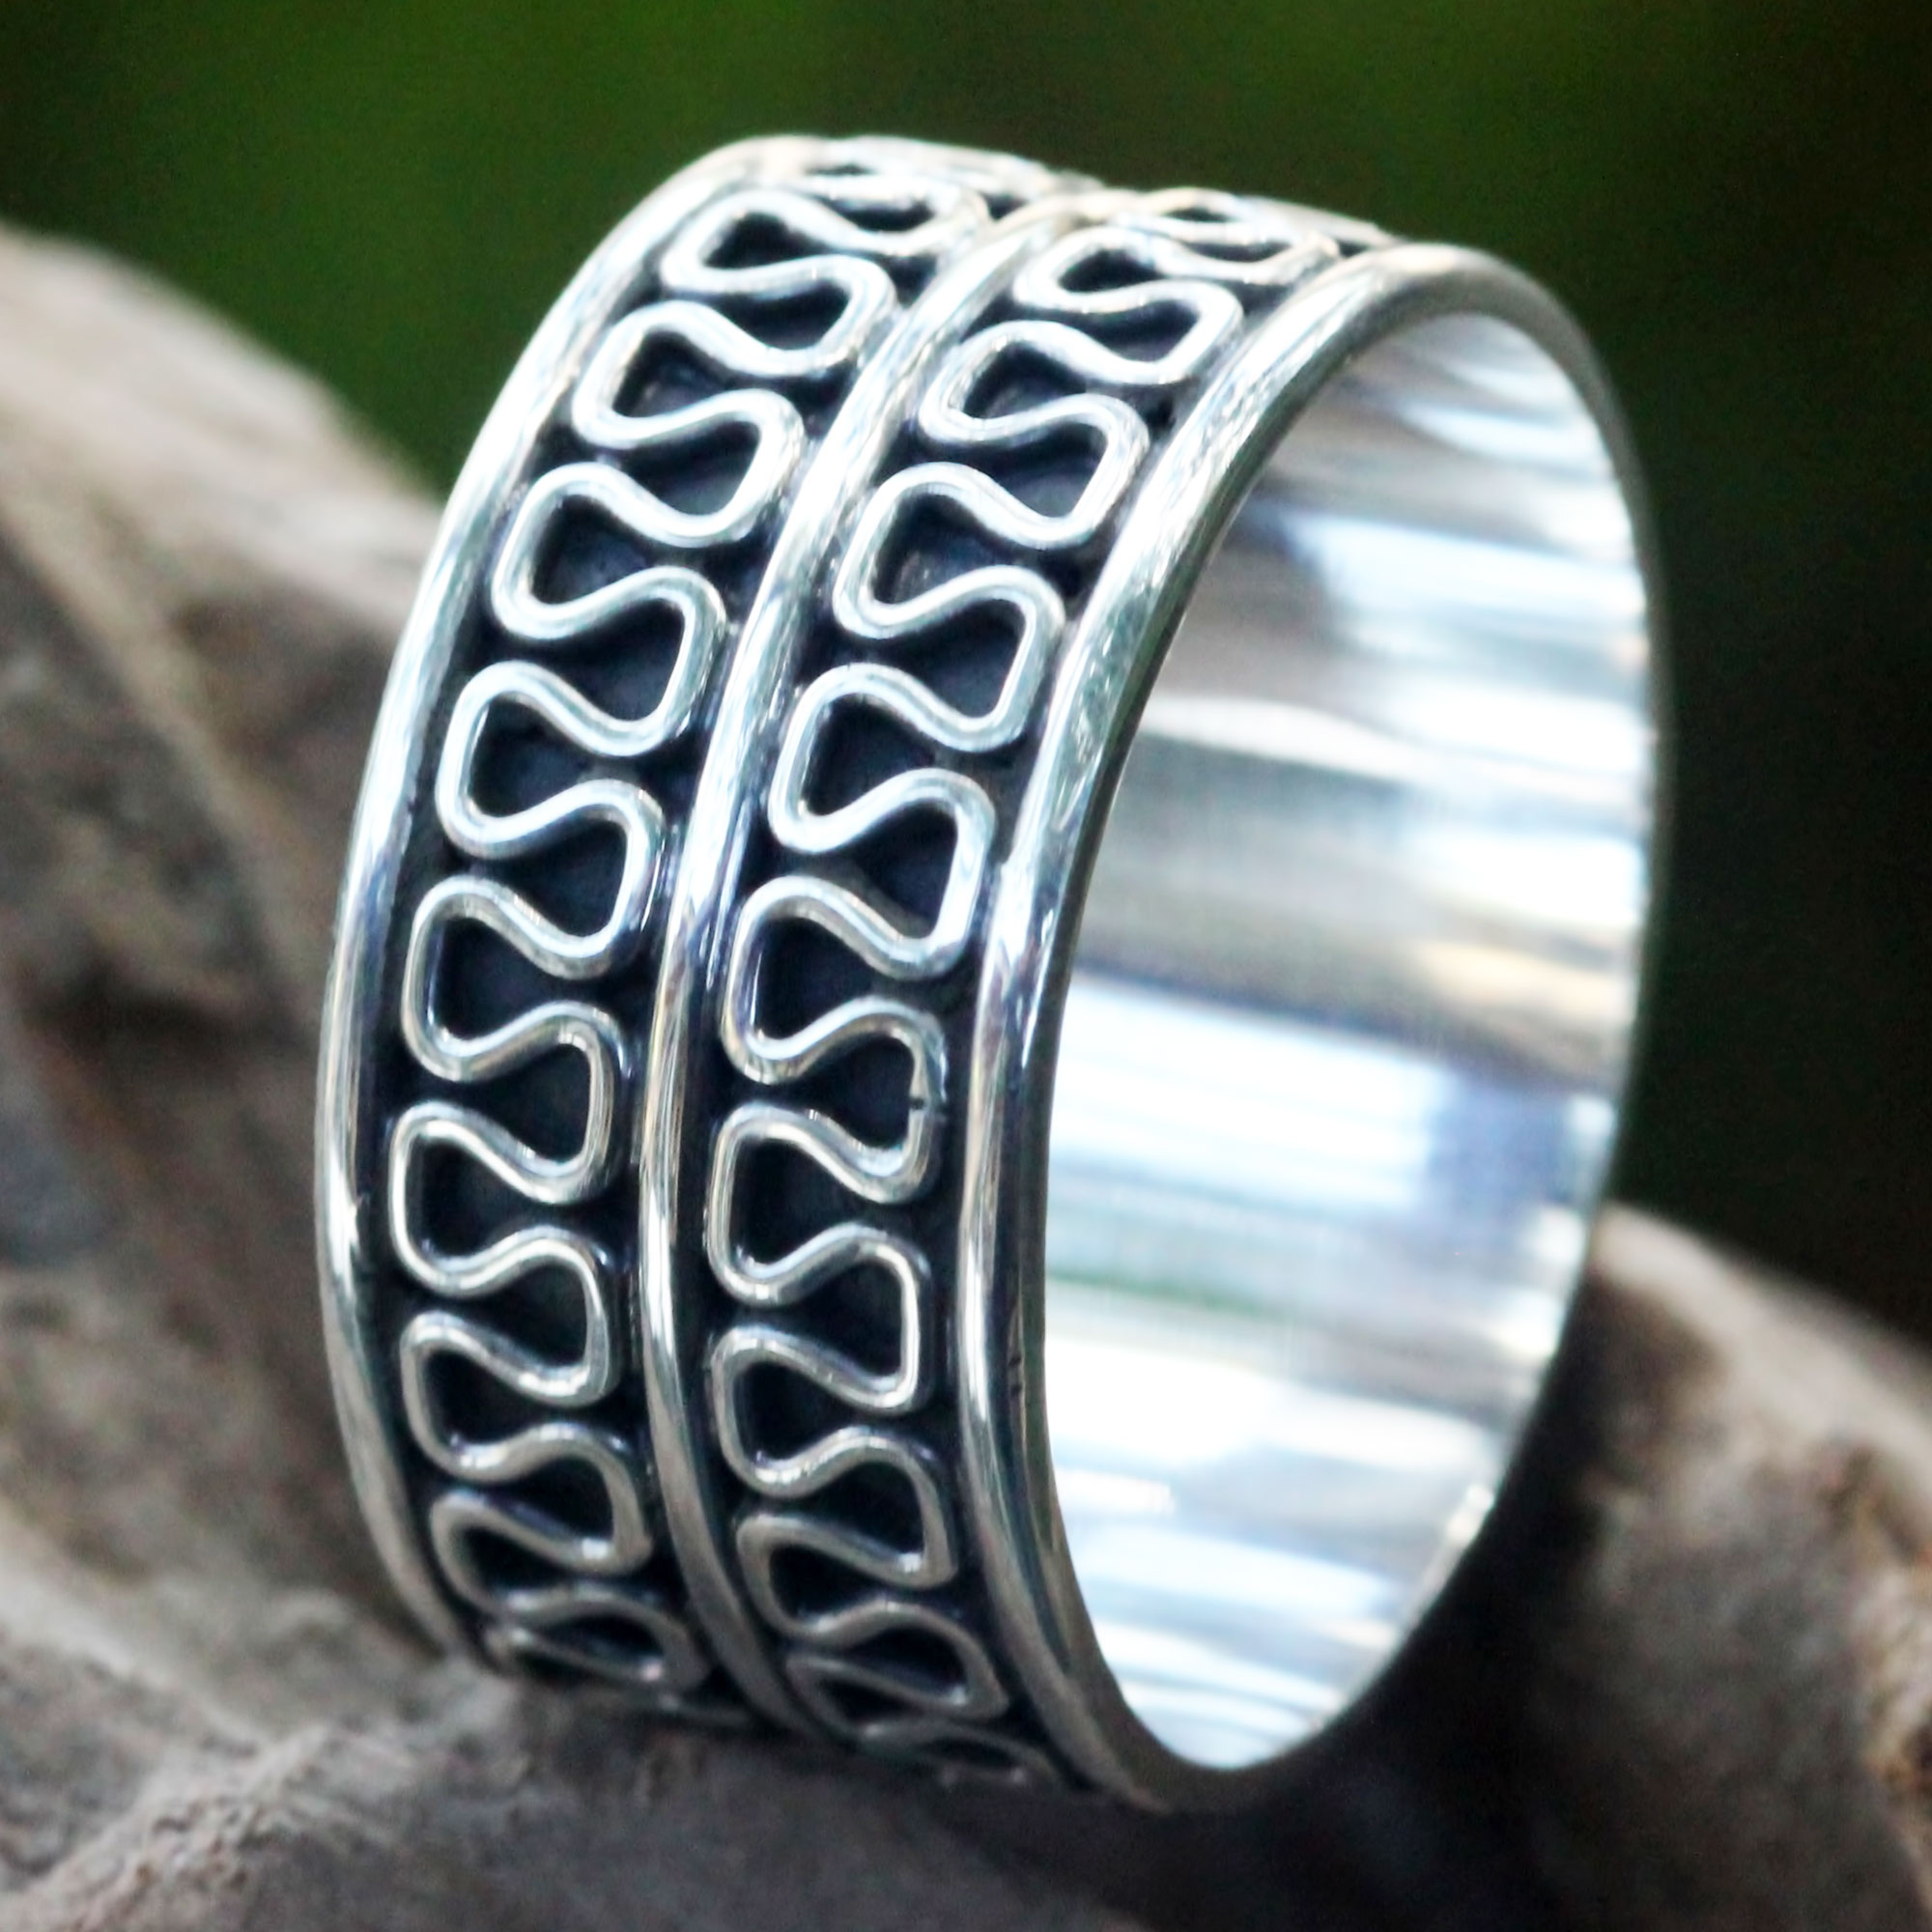 Men's Jewelry Sterling Silver Band Ring Artisan Crafted - Ripple